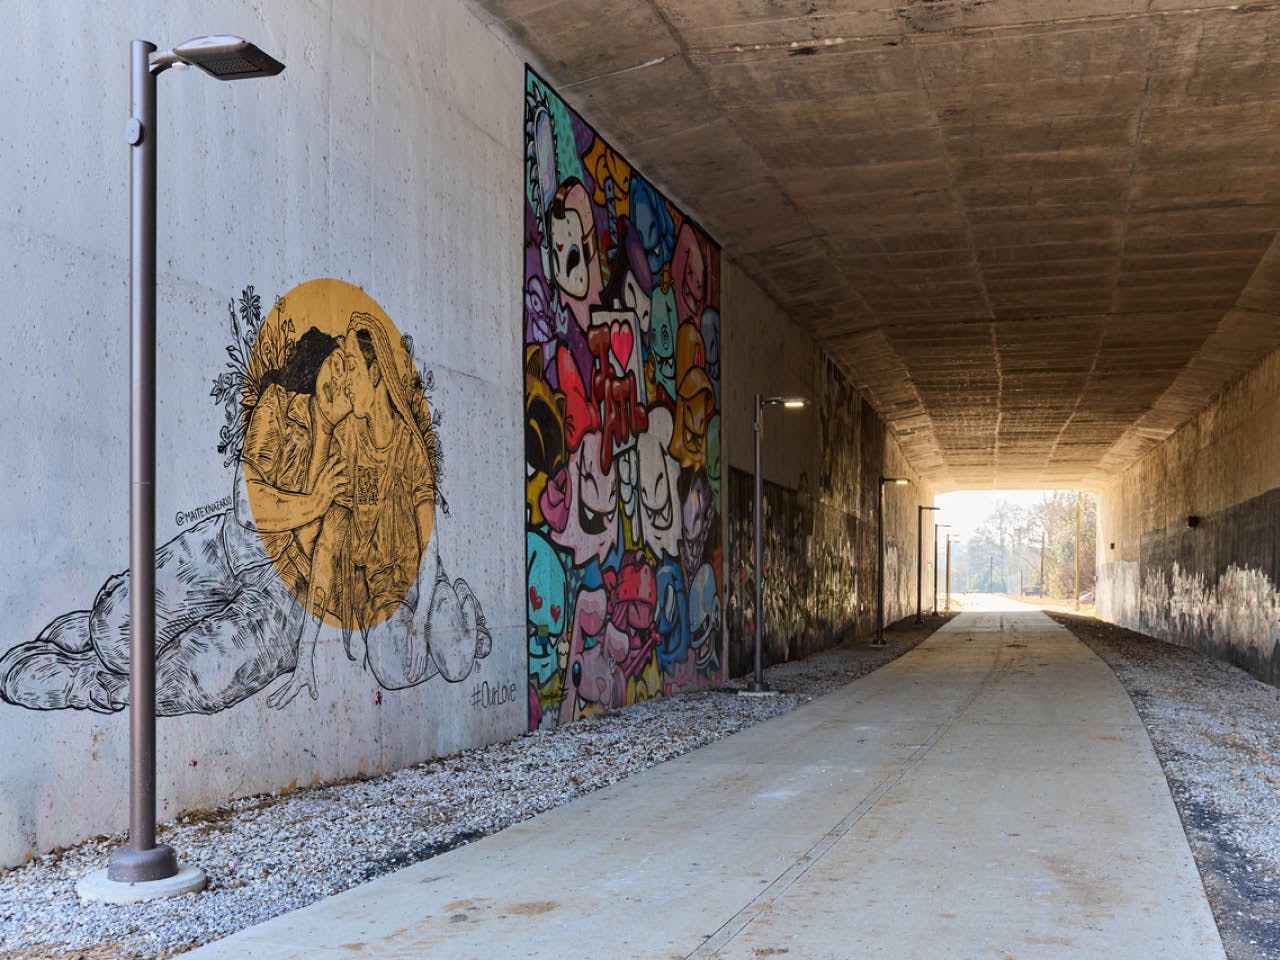 Murals cover the walls of the tunnel under I-85 as part of Art on the Beltline. (Photo Credit: Erin Sintos)